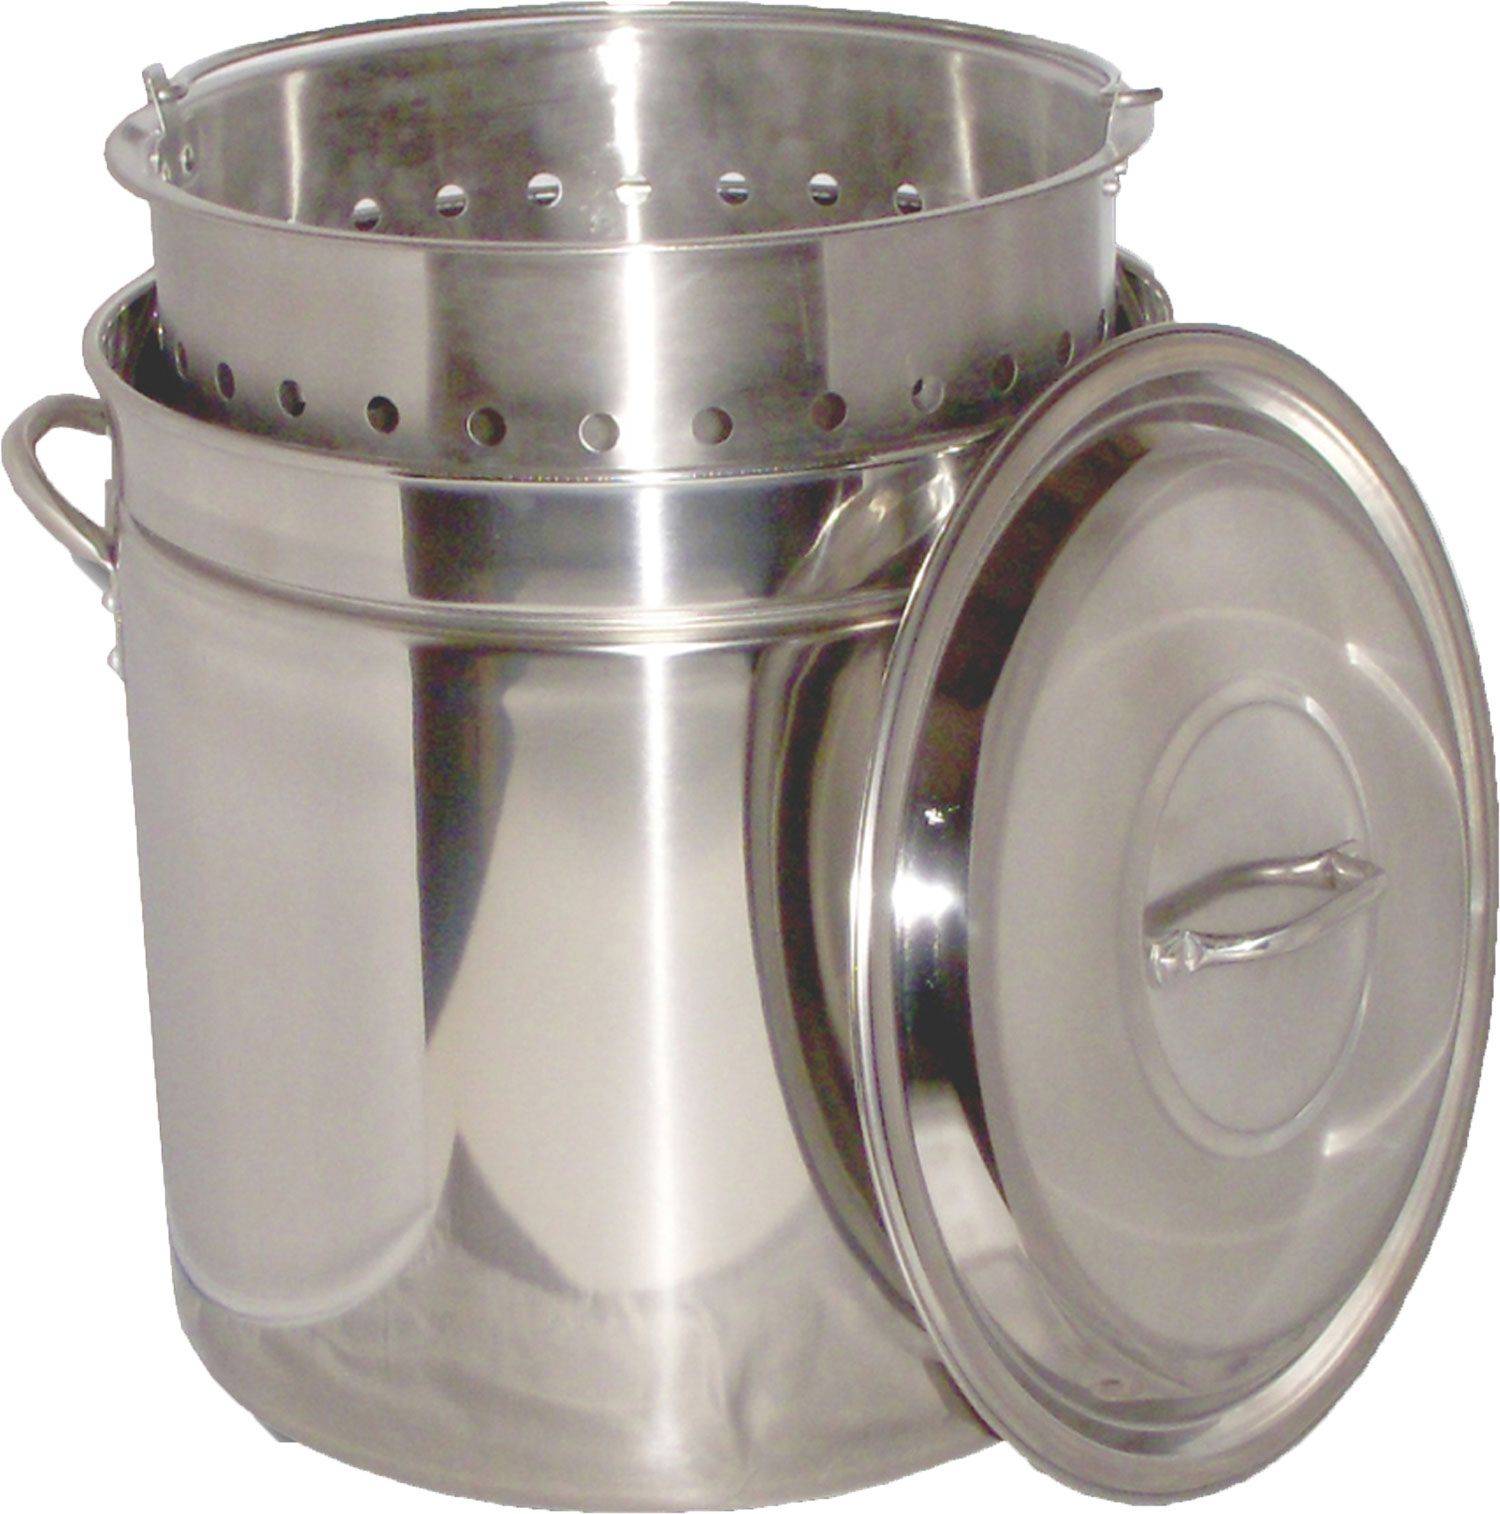 King Kooker 44 Quart Stainless Steel Camp Boiling Pot with Steam Rim